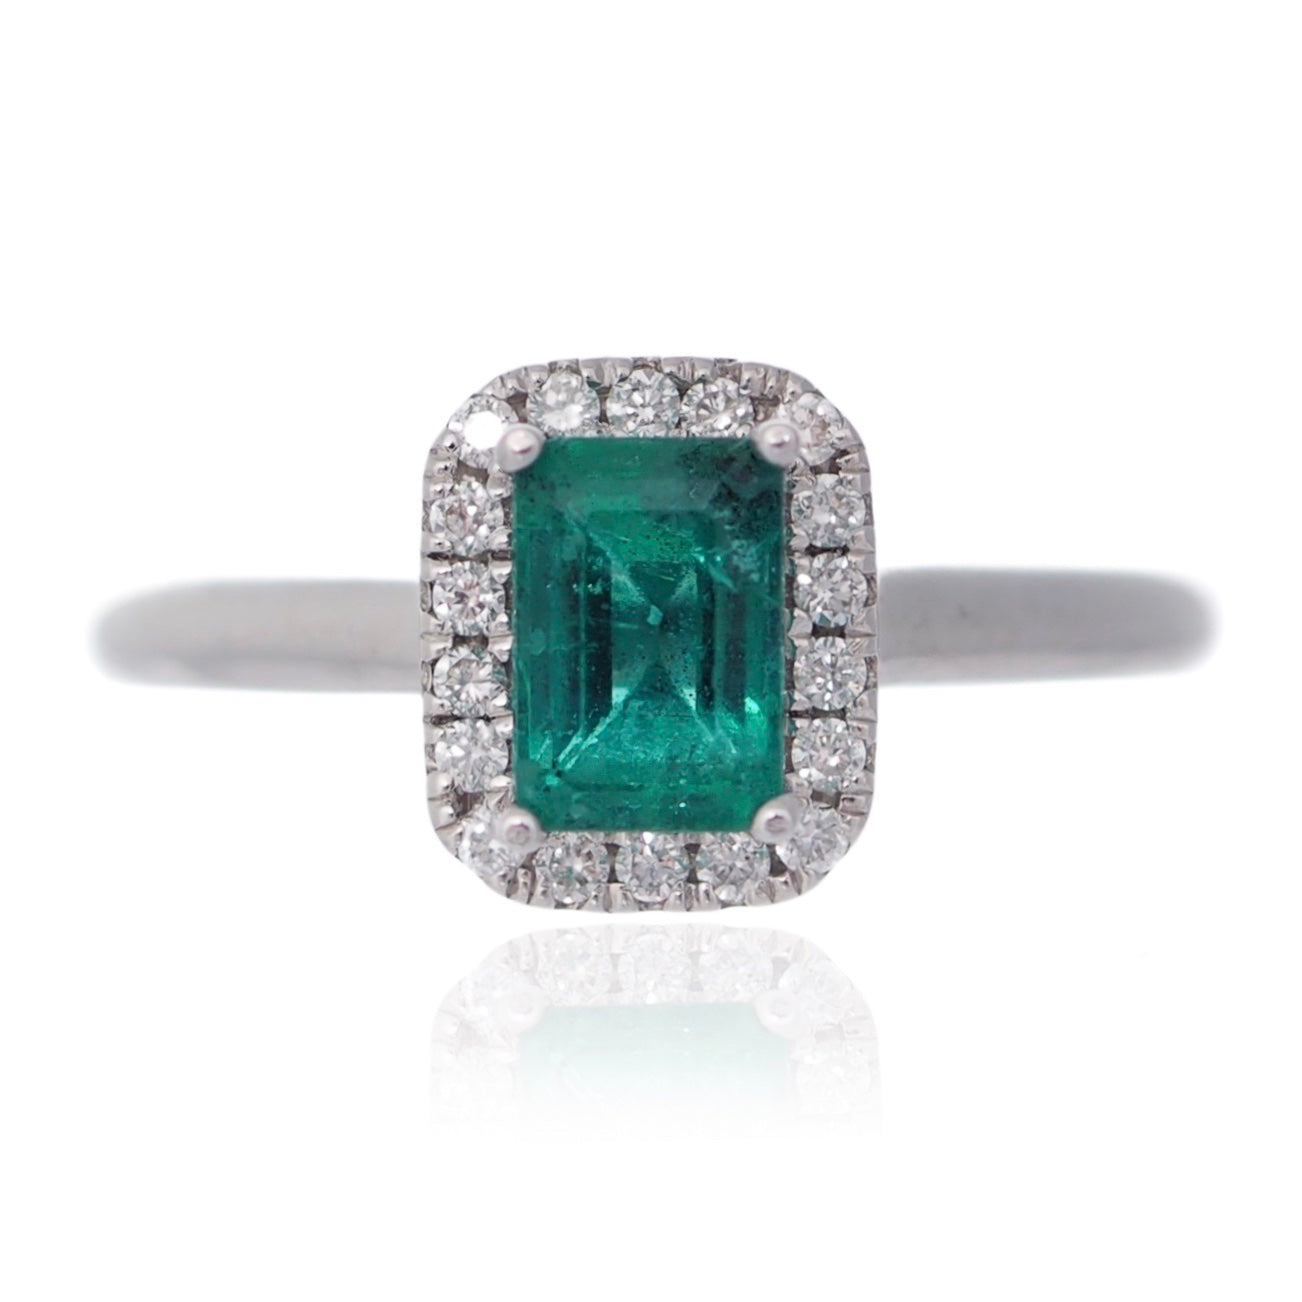 Emerald cut Emerald and Diamond Halo engagement ring White gold Harrogate jewellers Fogal and Barnes